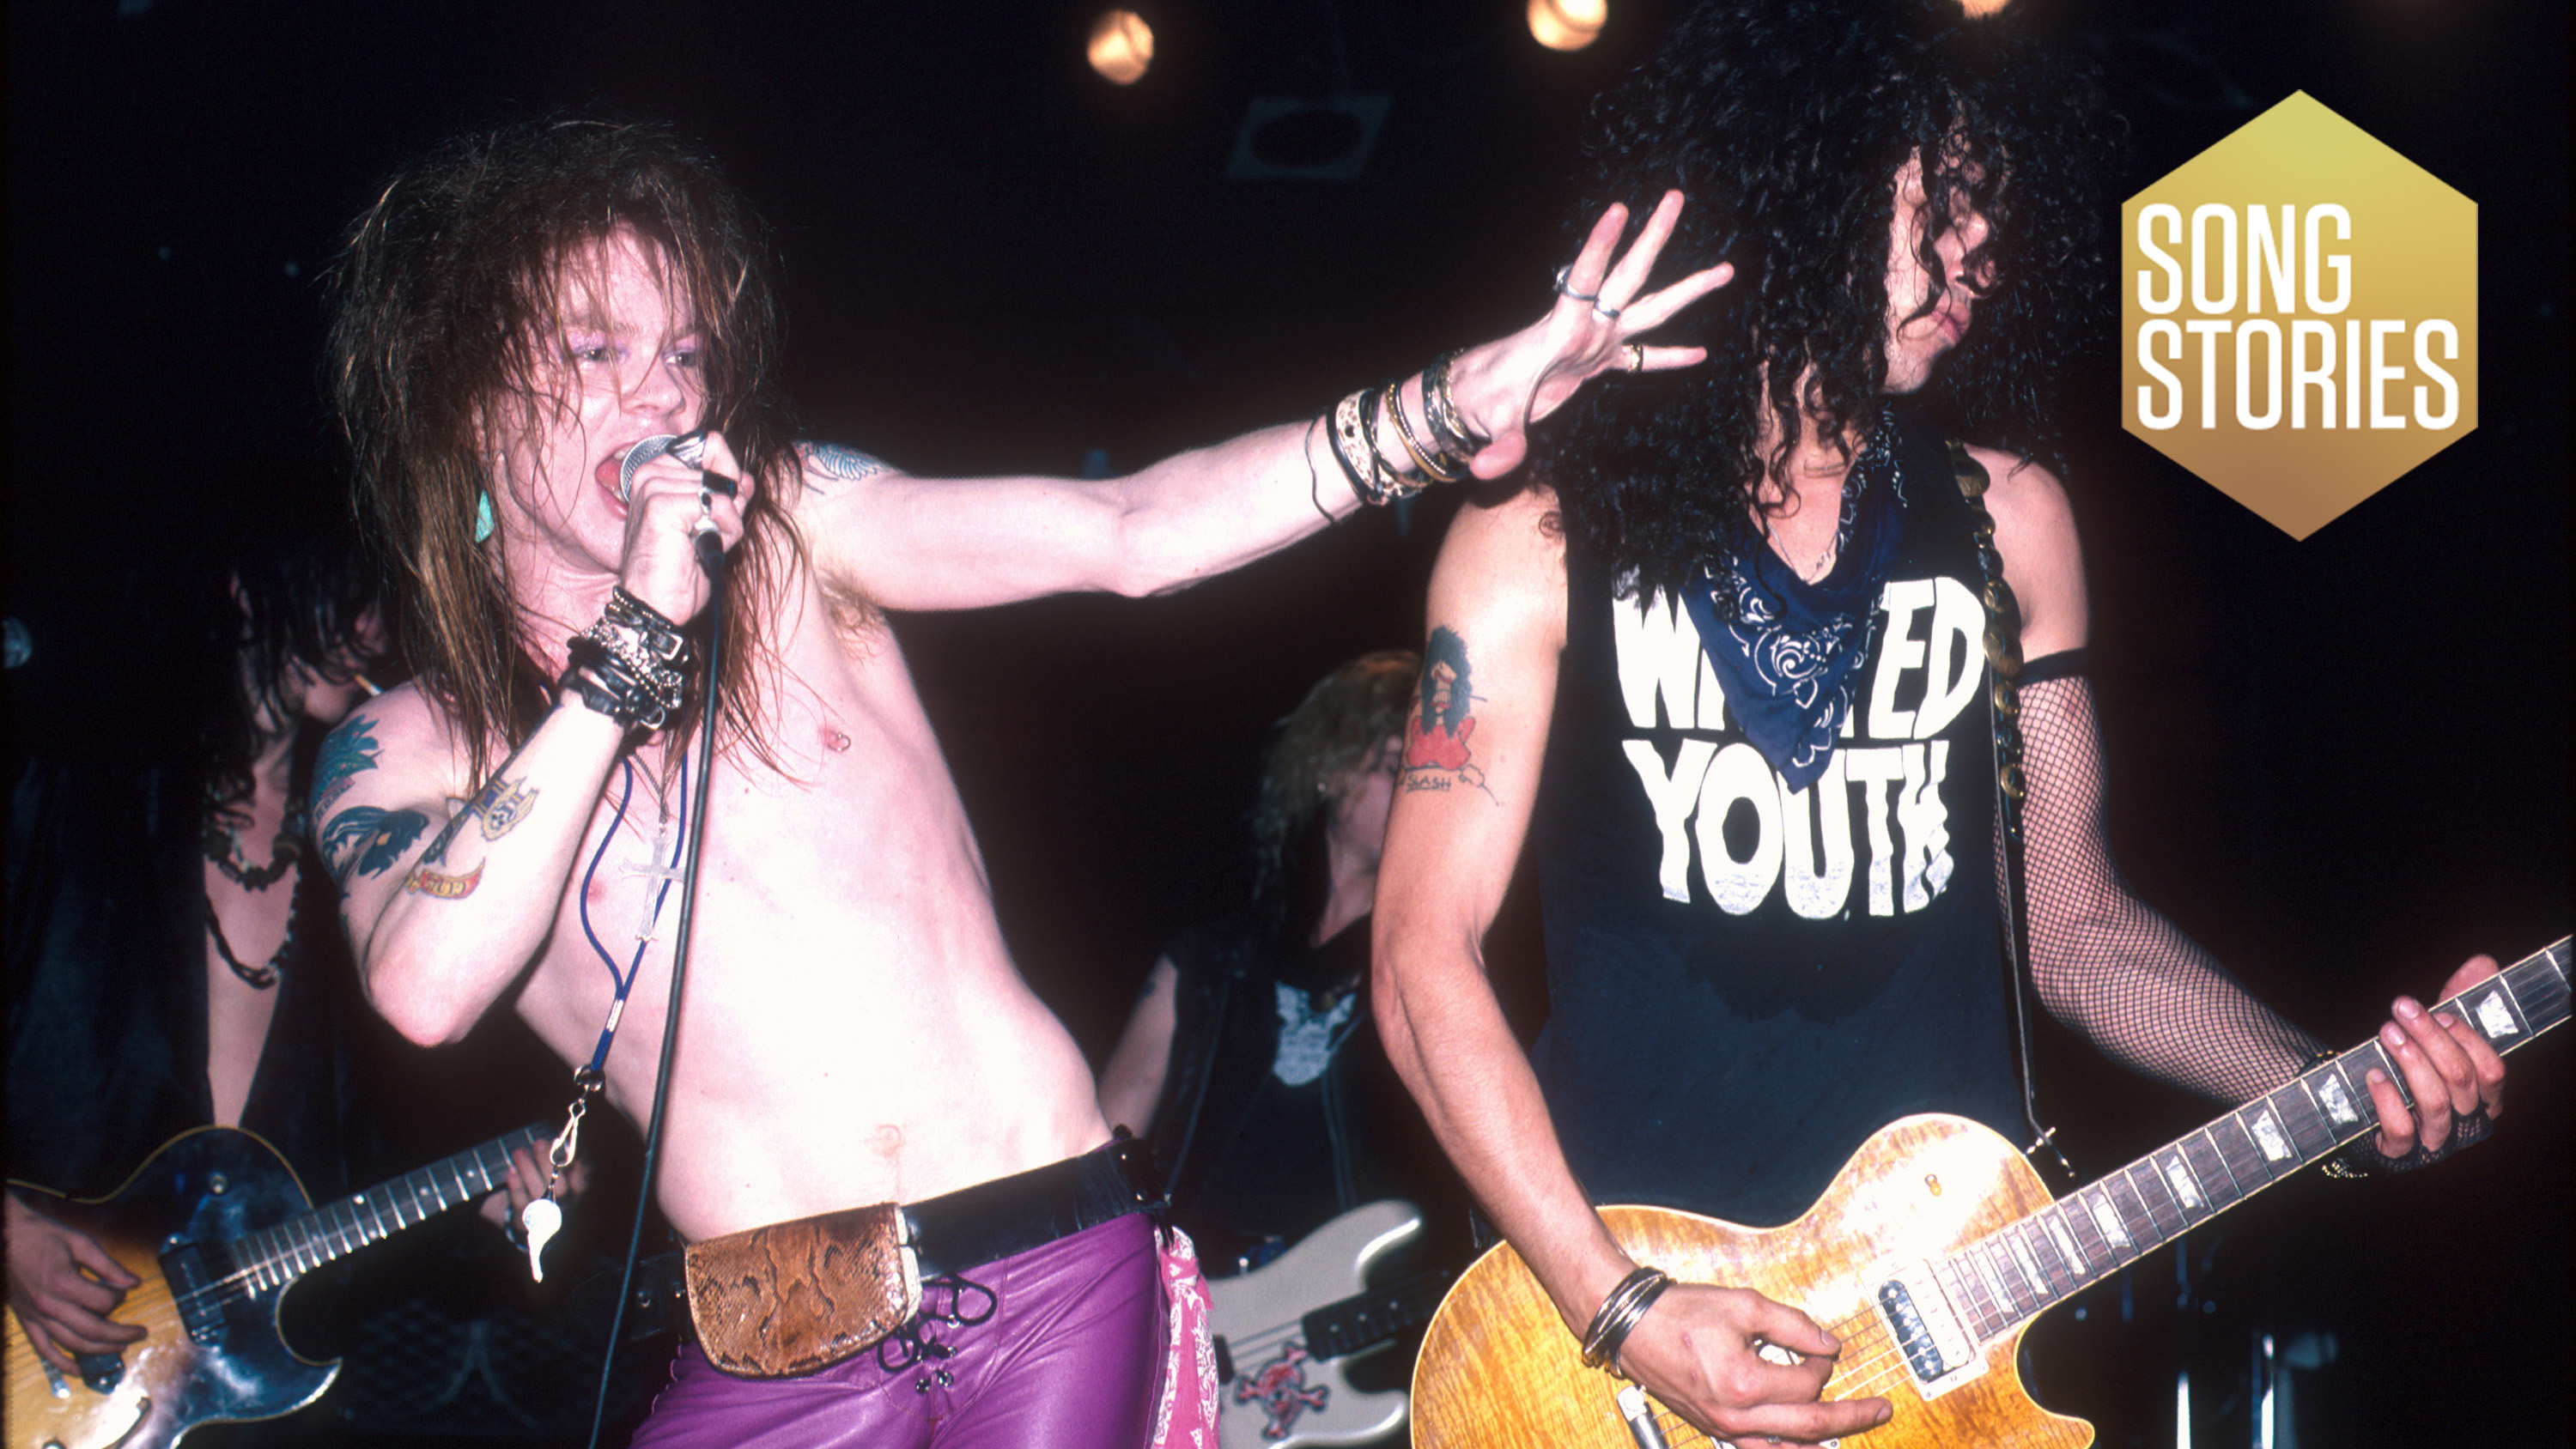 A new Guns N' Roses single could come any day now